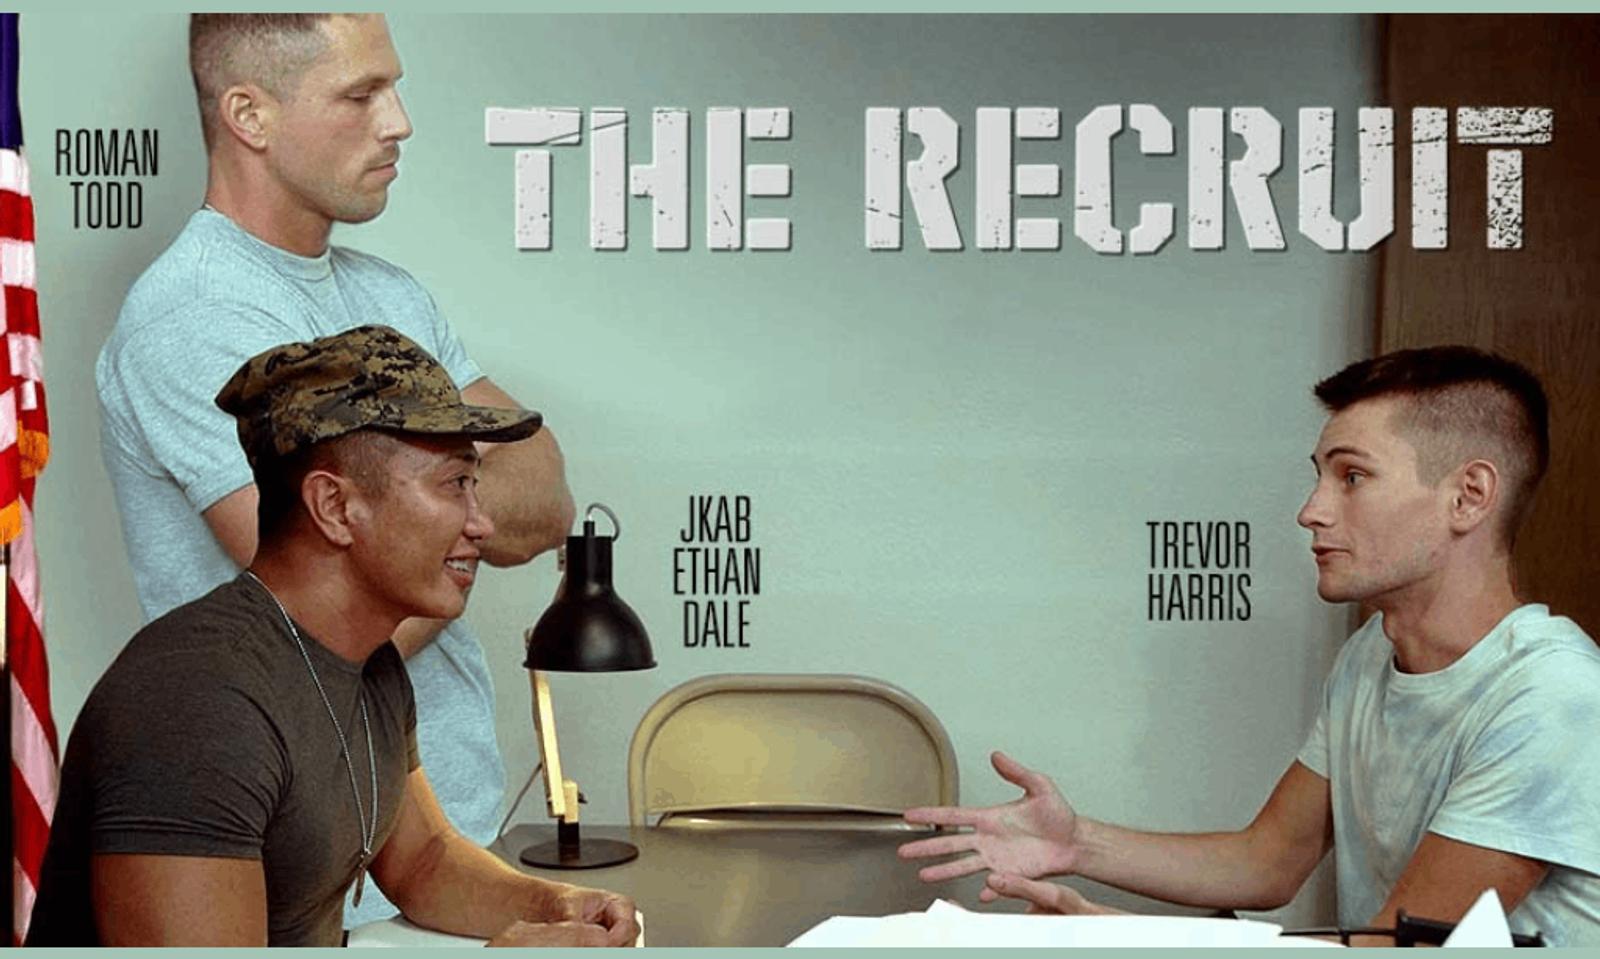 Disruptive Films Rises in the Ranks With 'The Recruit'